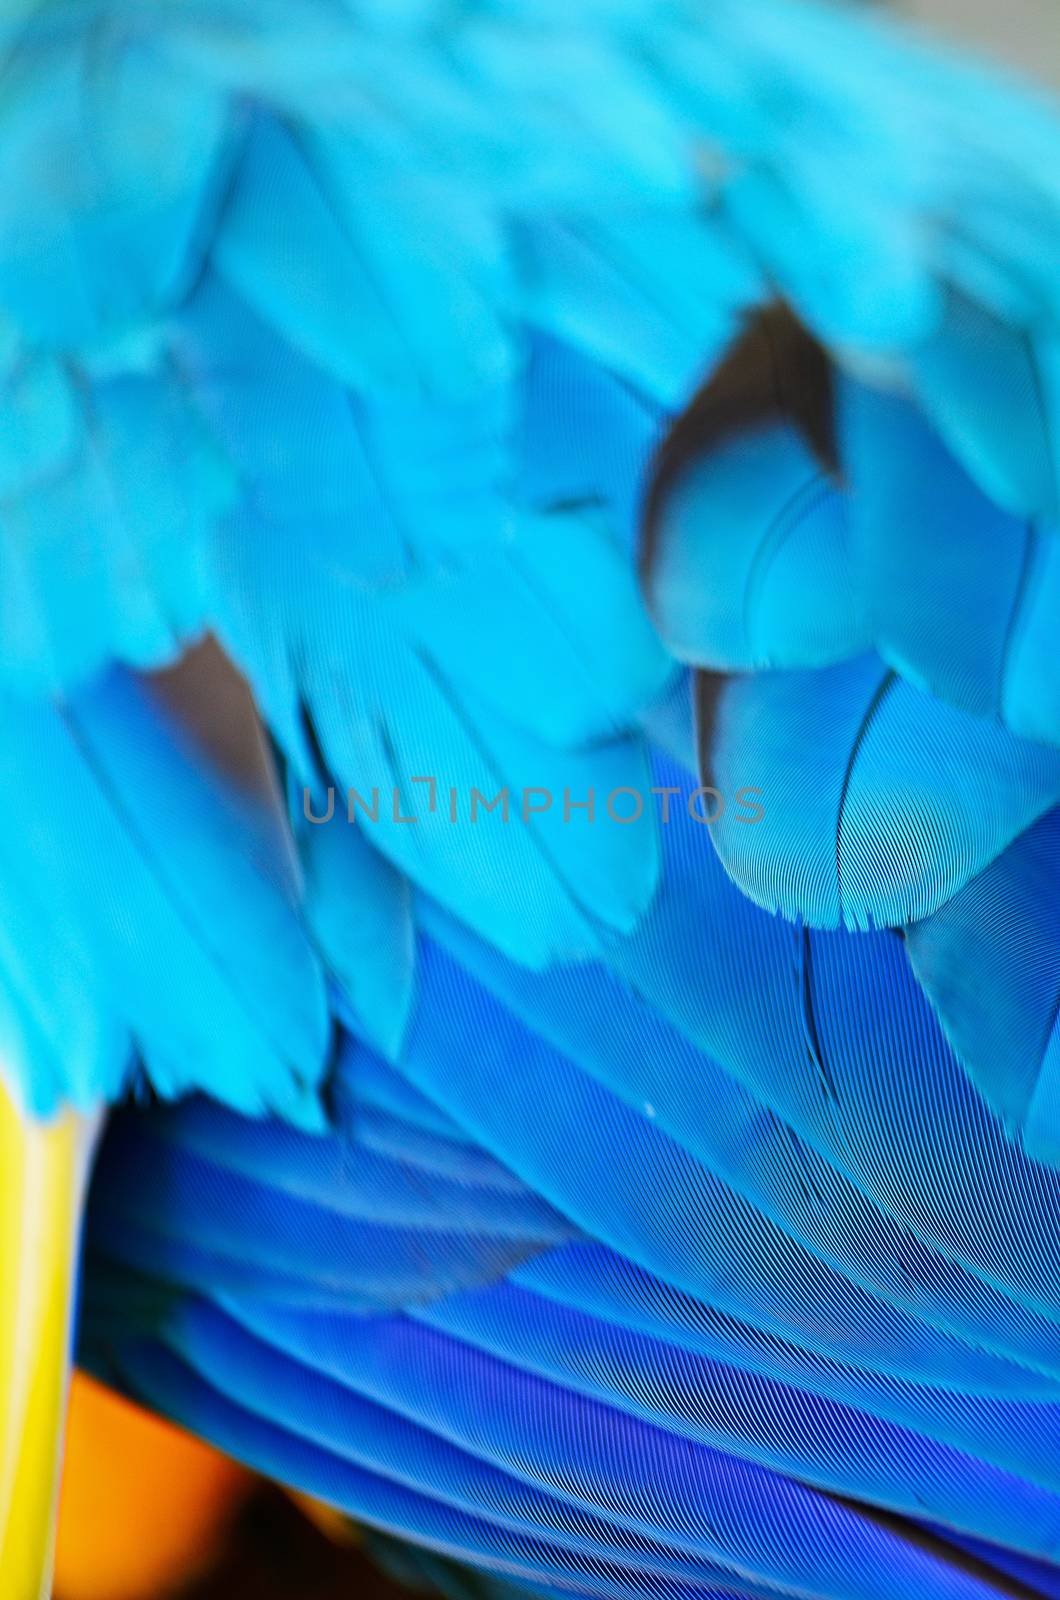 Blue and Gold Macaw feather